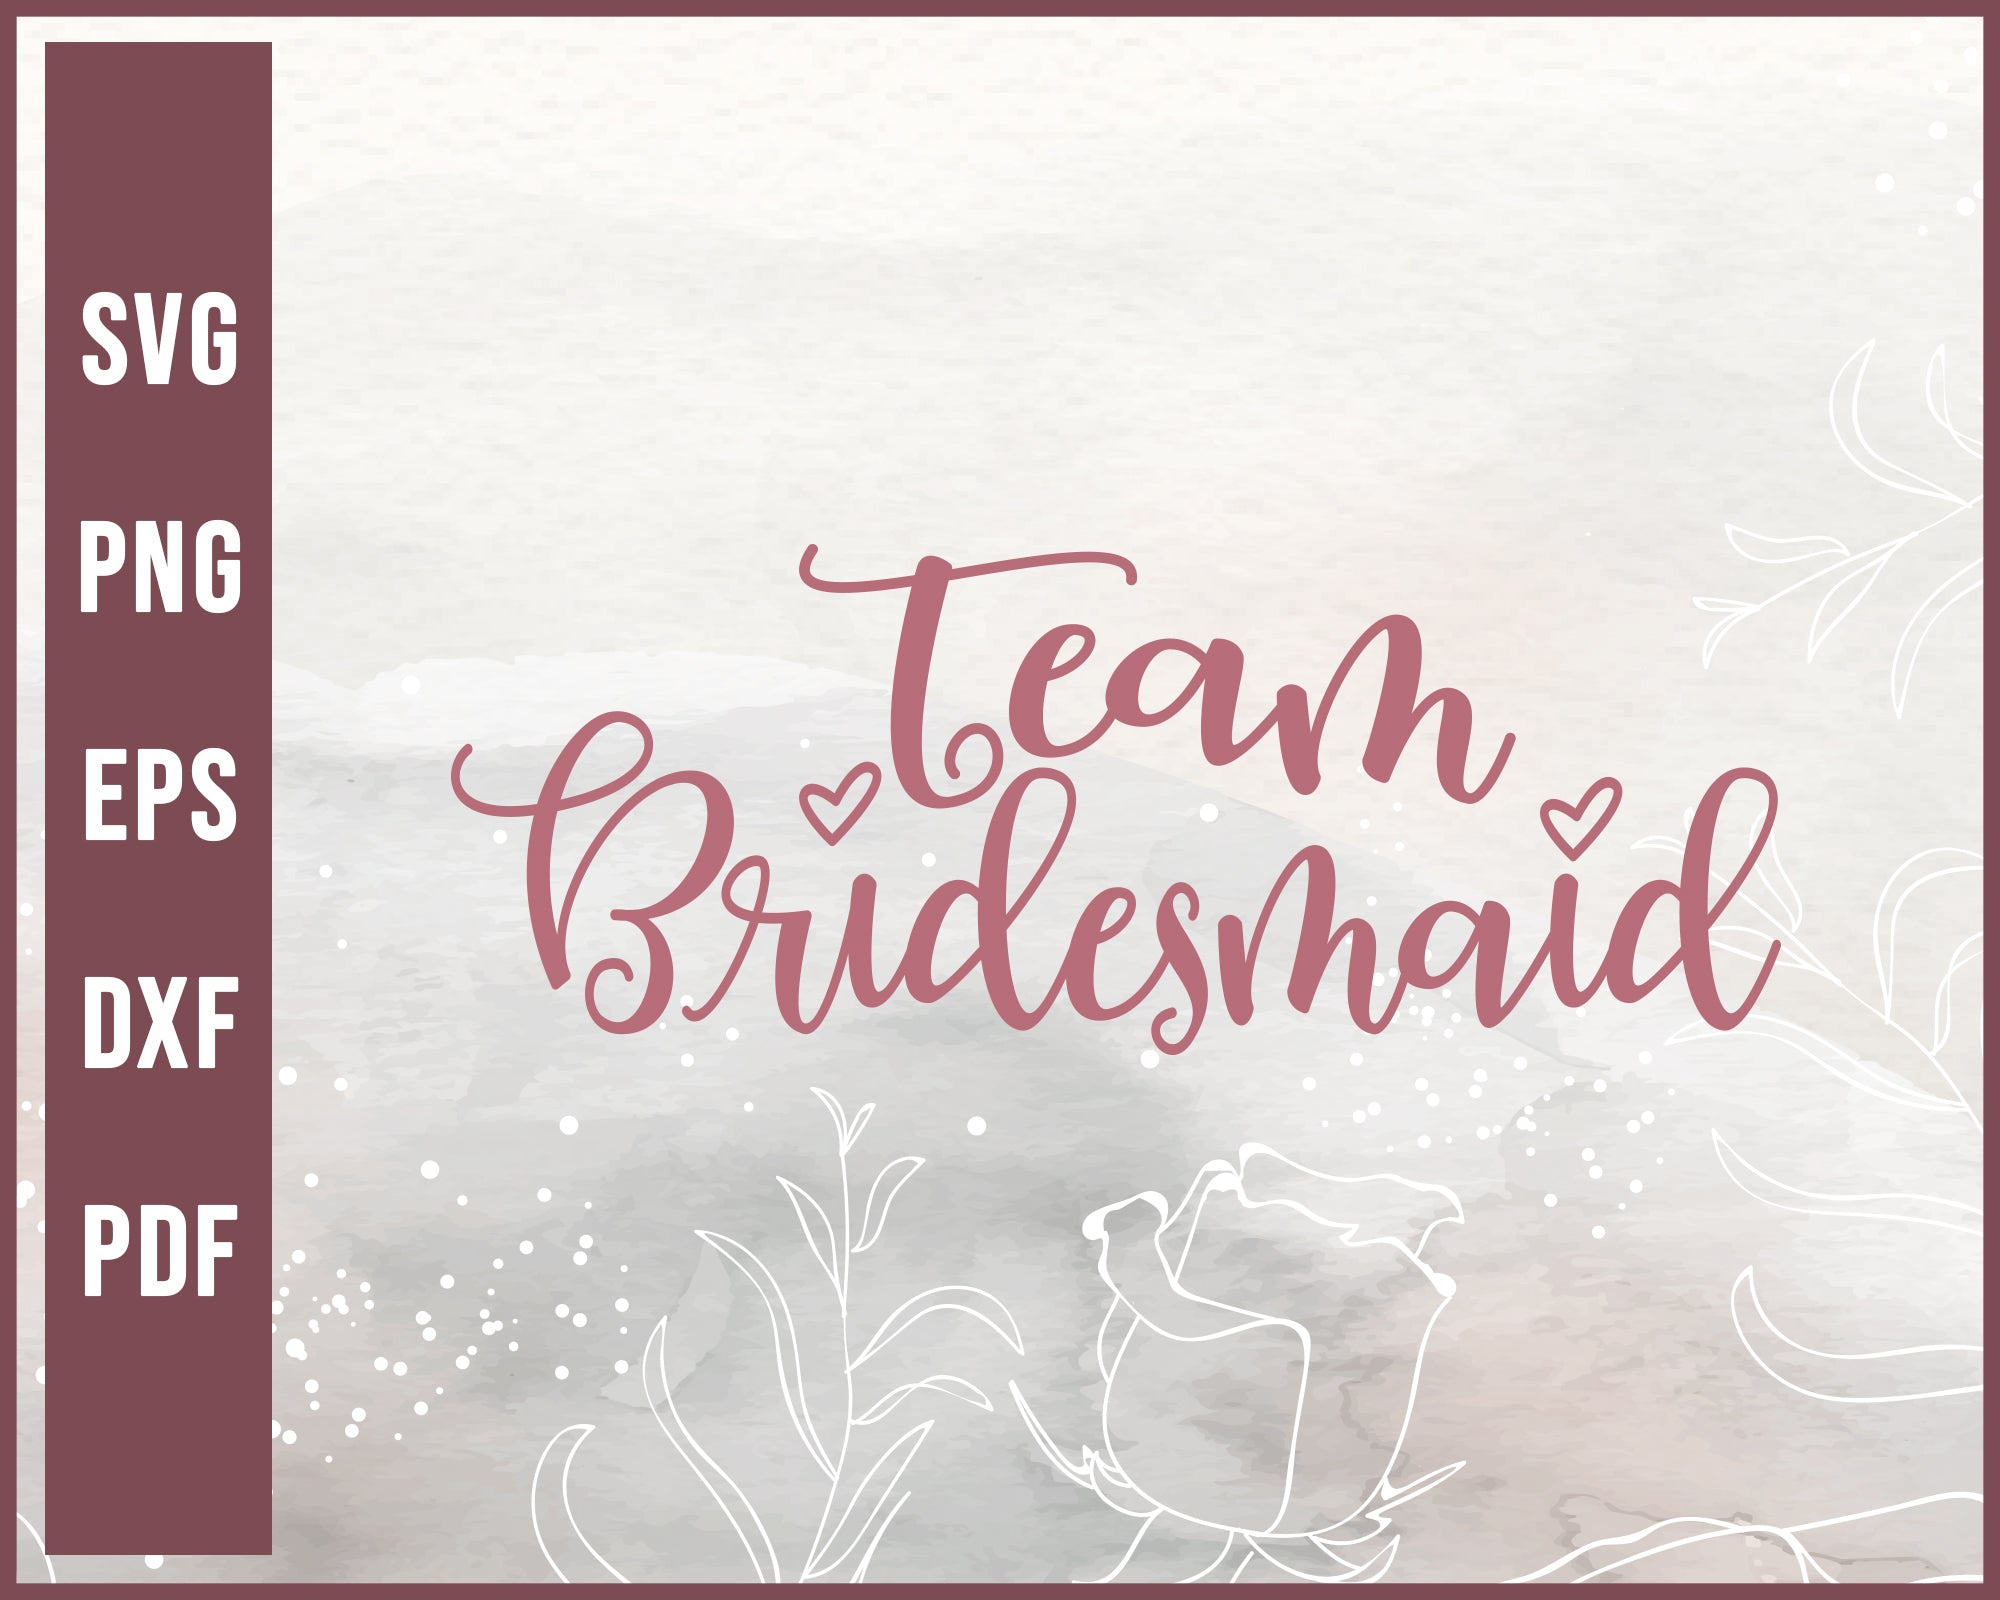 Team Bridesmaid Wedding svg Designs For Cricut Silhouette And eps png Printable Files